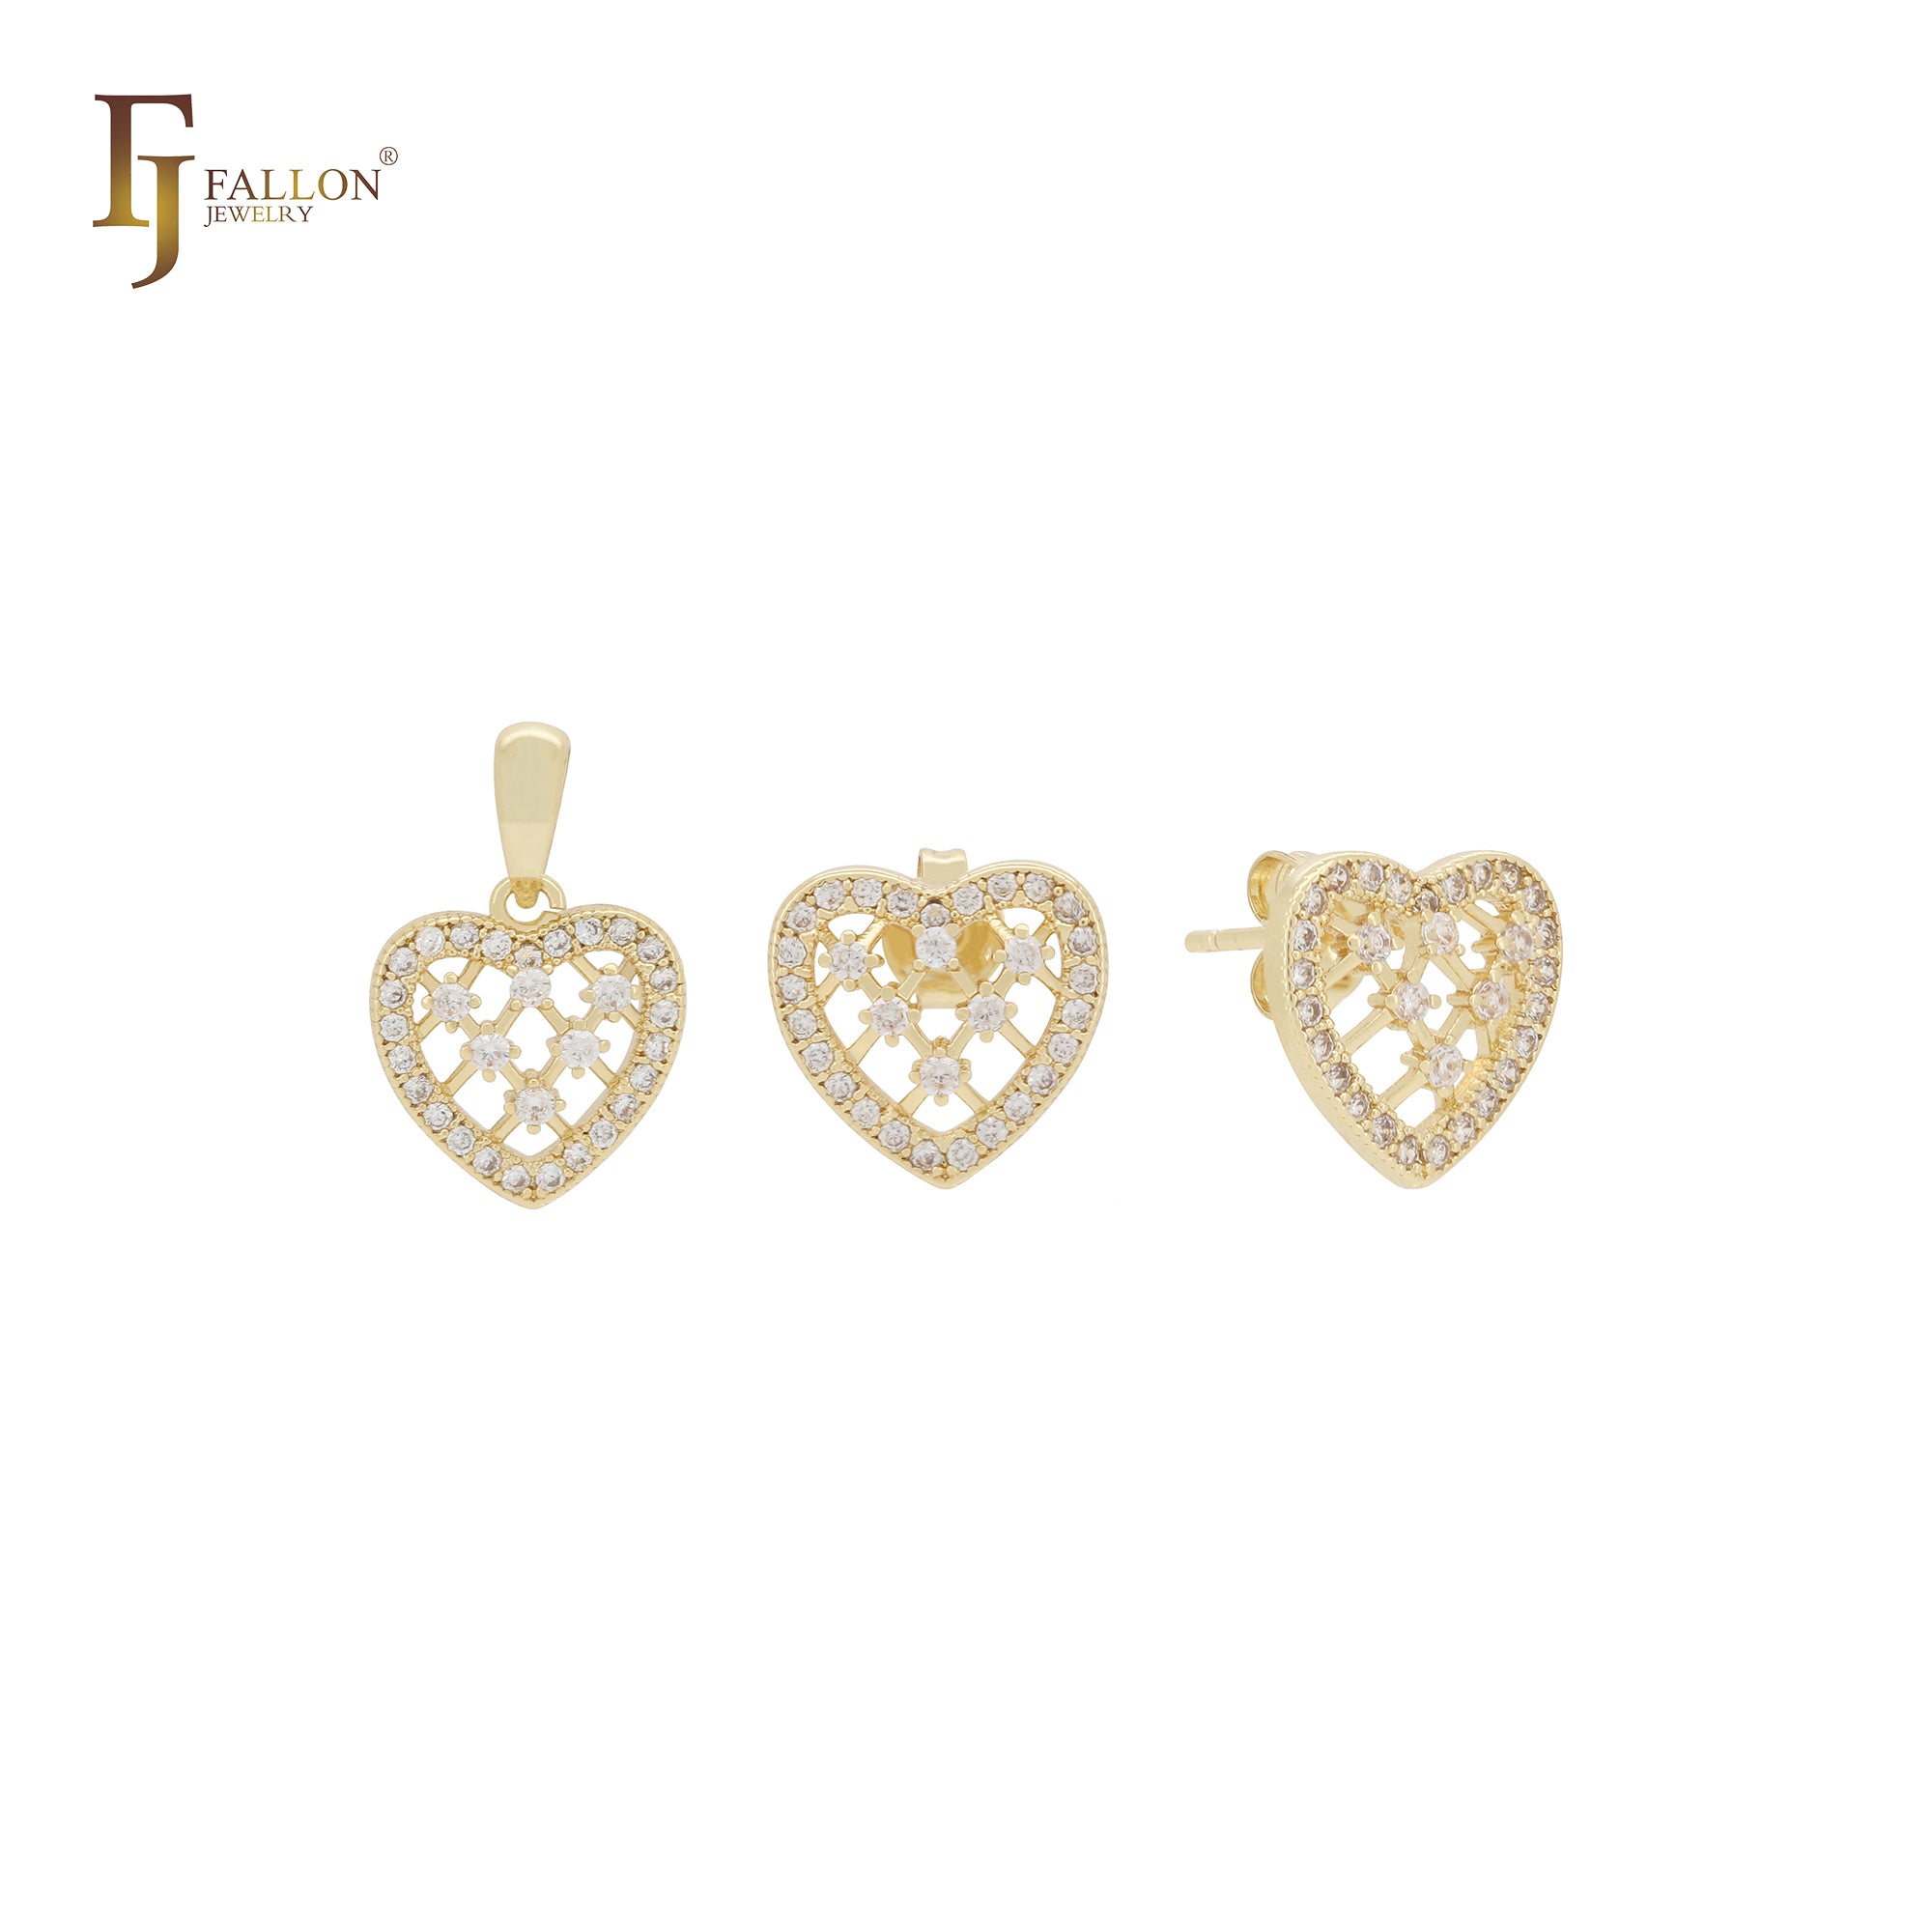 Petit tiny Net cluster white CZs heart shape 14K Gold Jewelry Set with Pendant and Stud Earrings